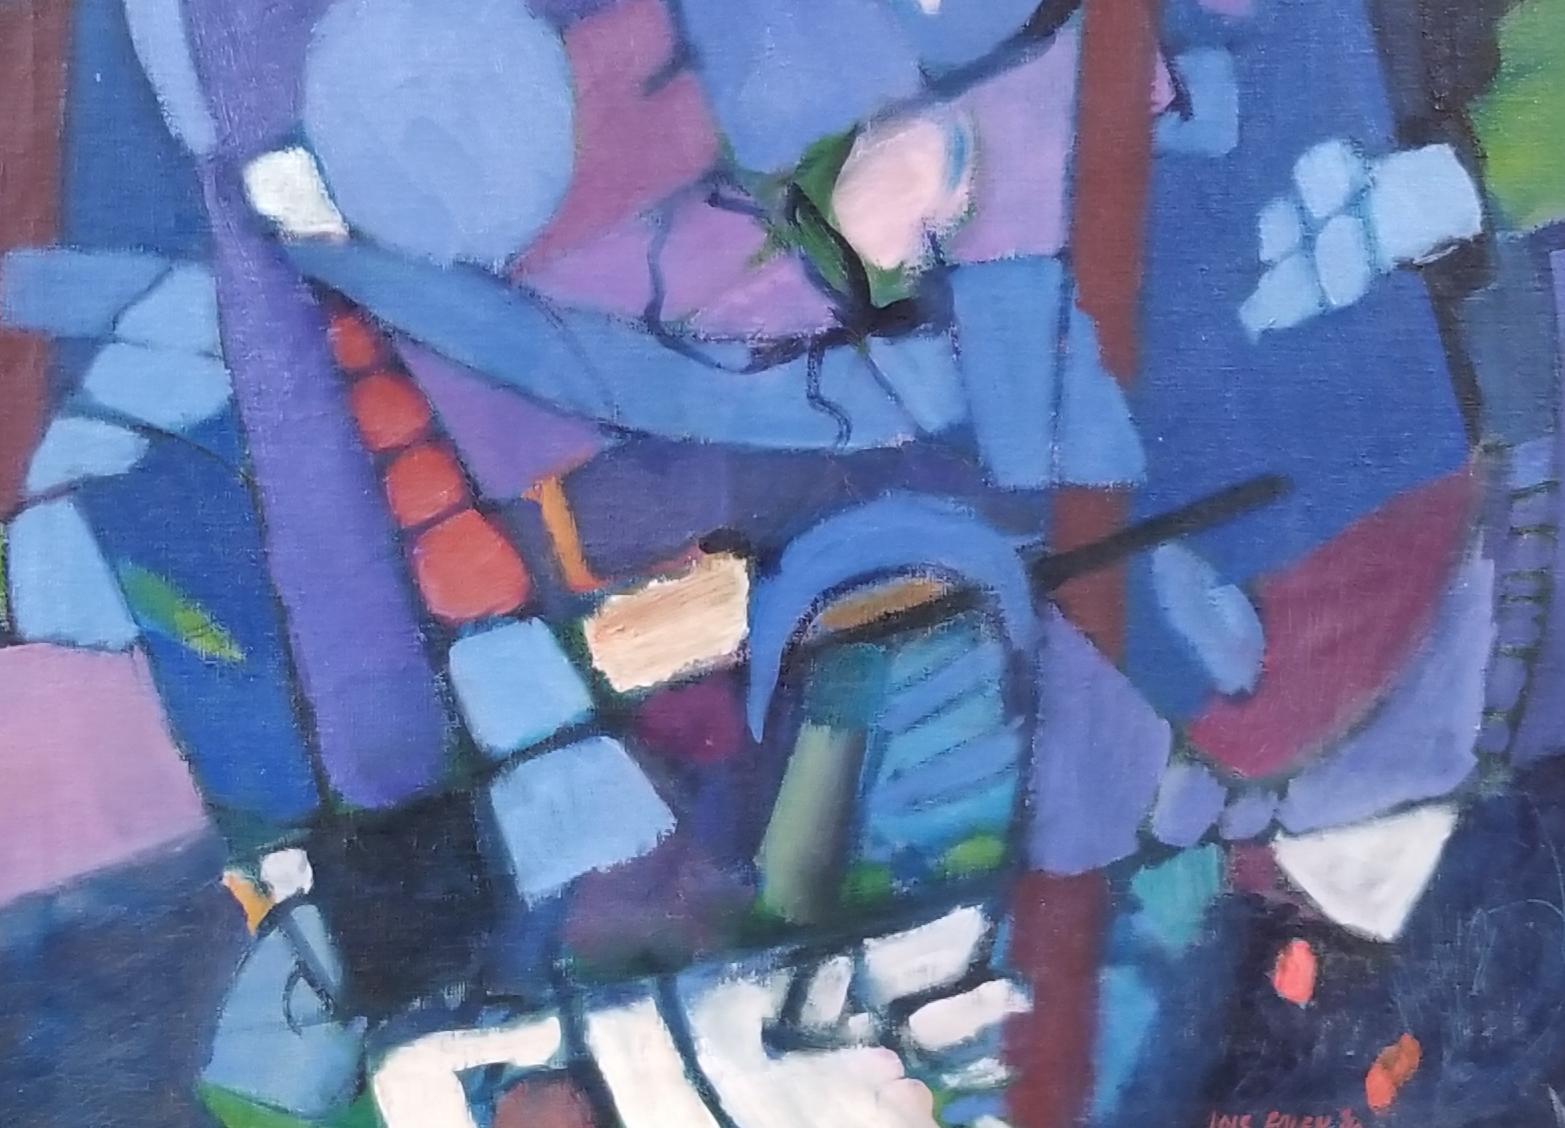 Lois Foley (1936-2000). Striking abstract painting with a rich, deep color palette consisting of light and dark blues, violets and purples. Retains original frame. Signed and dated lower right.

Lois Foley:
Lois Foley was born in Groton, Vermont